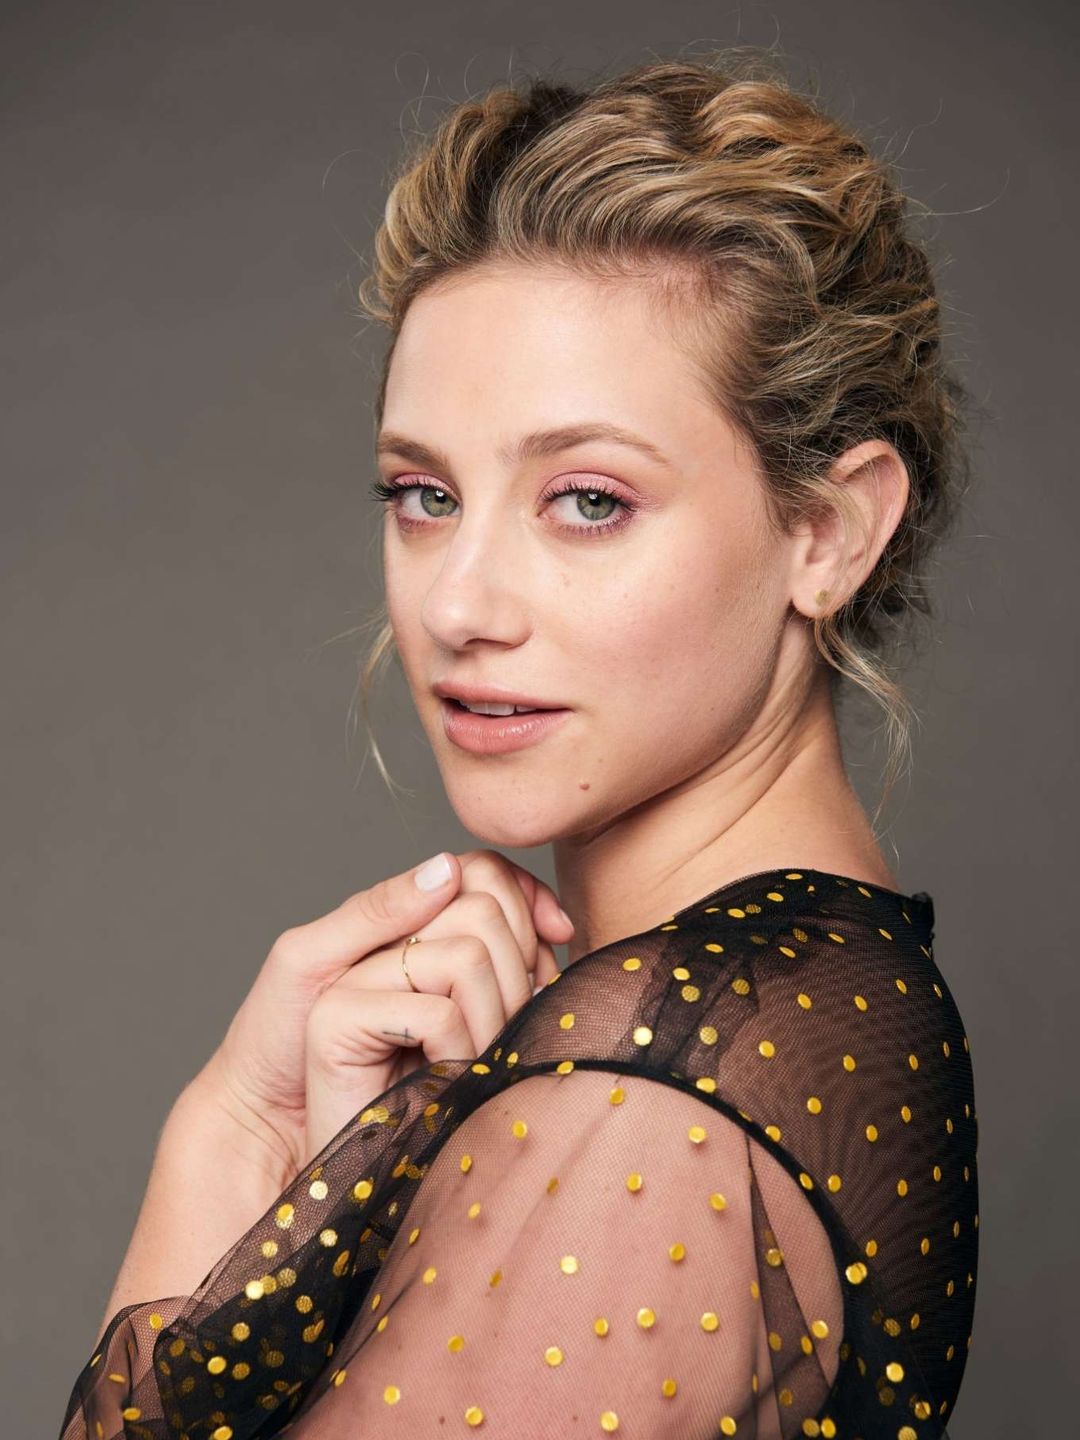 Lili Reinhart who is her father